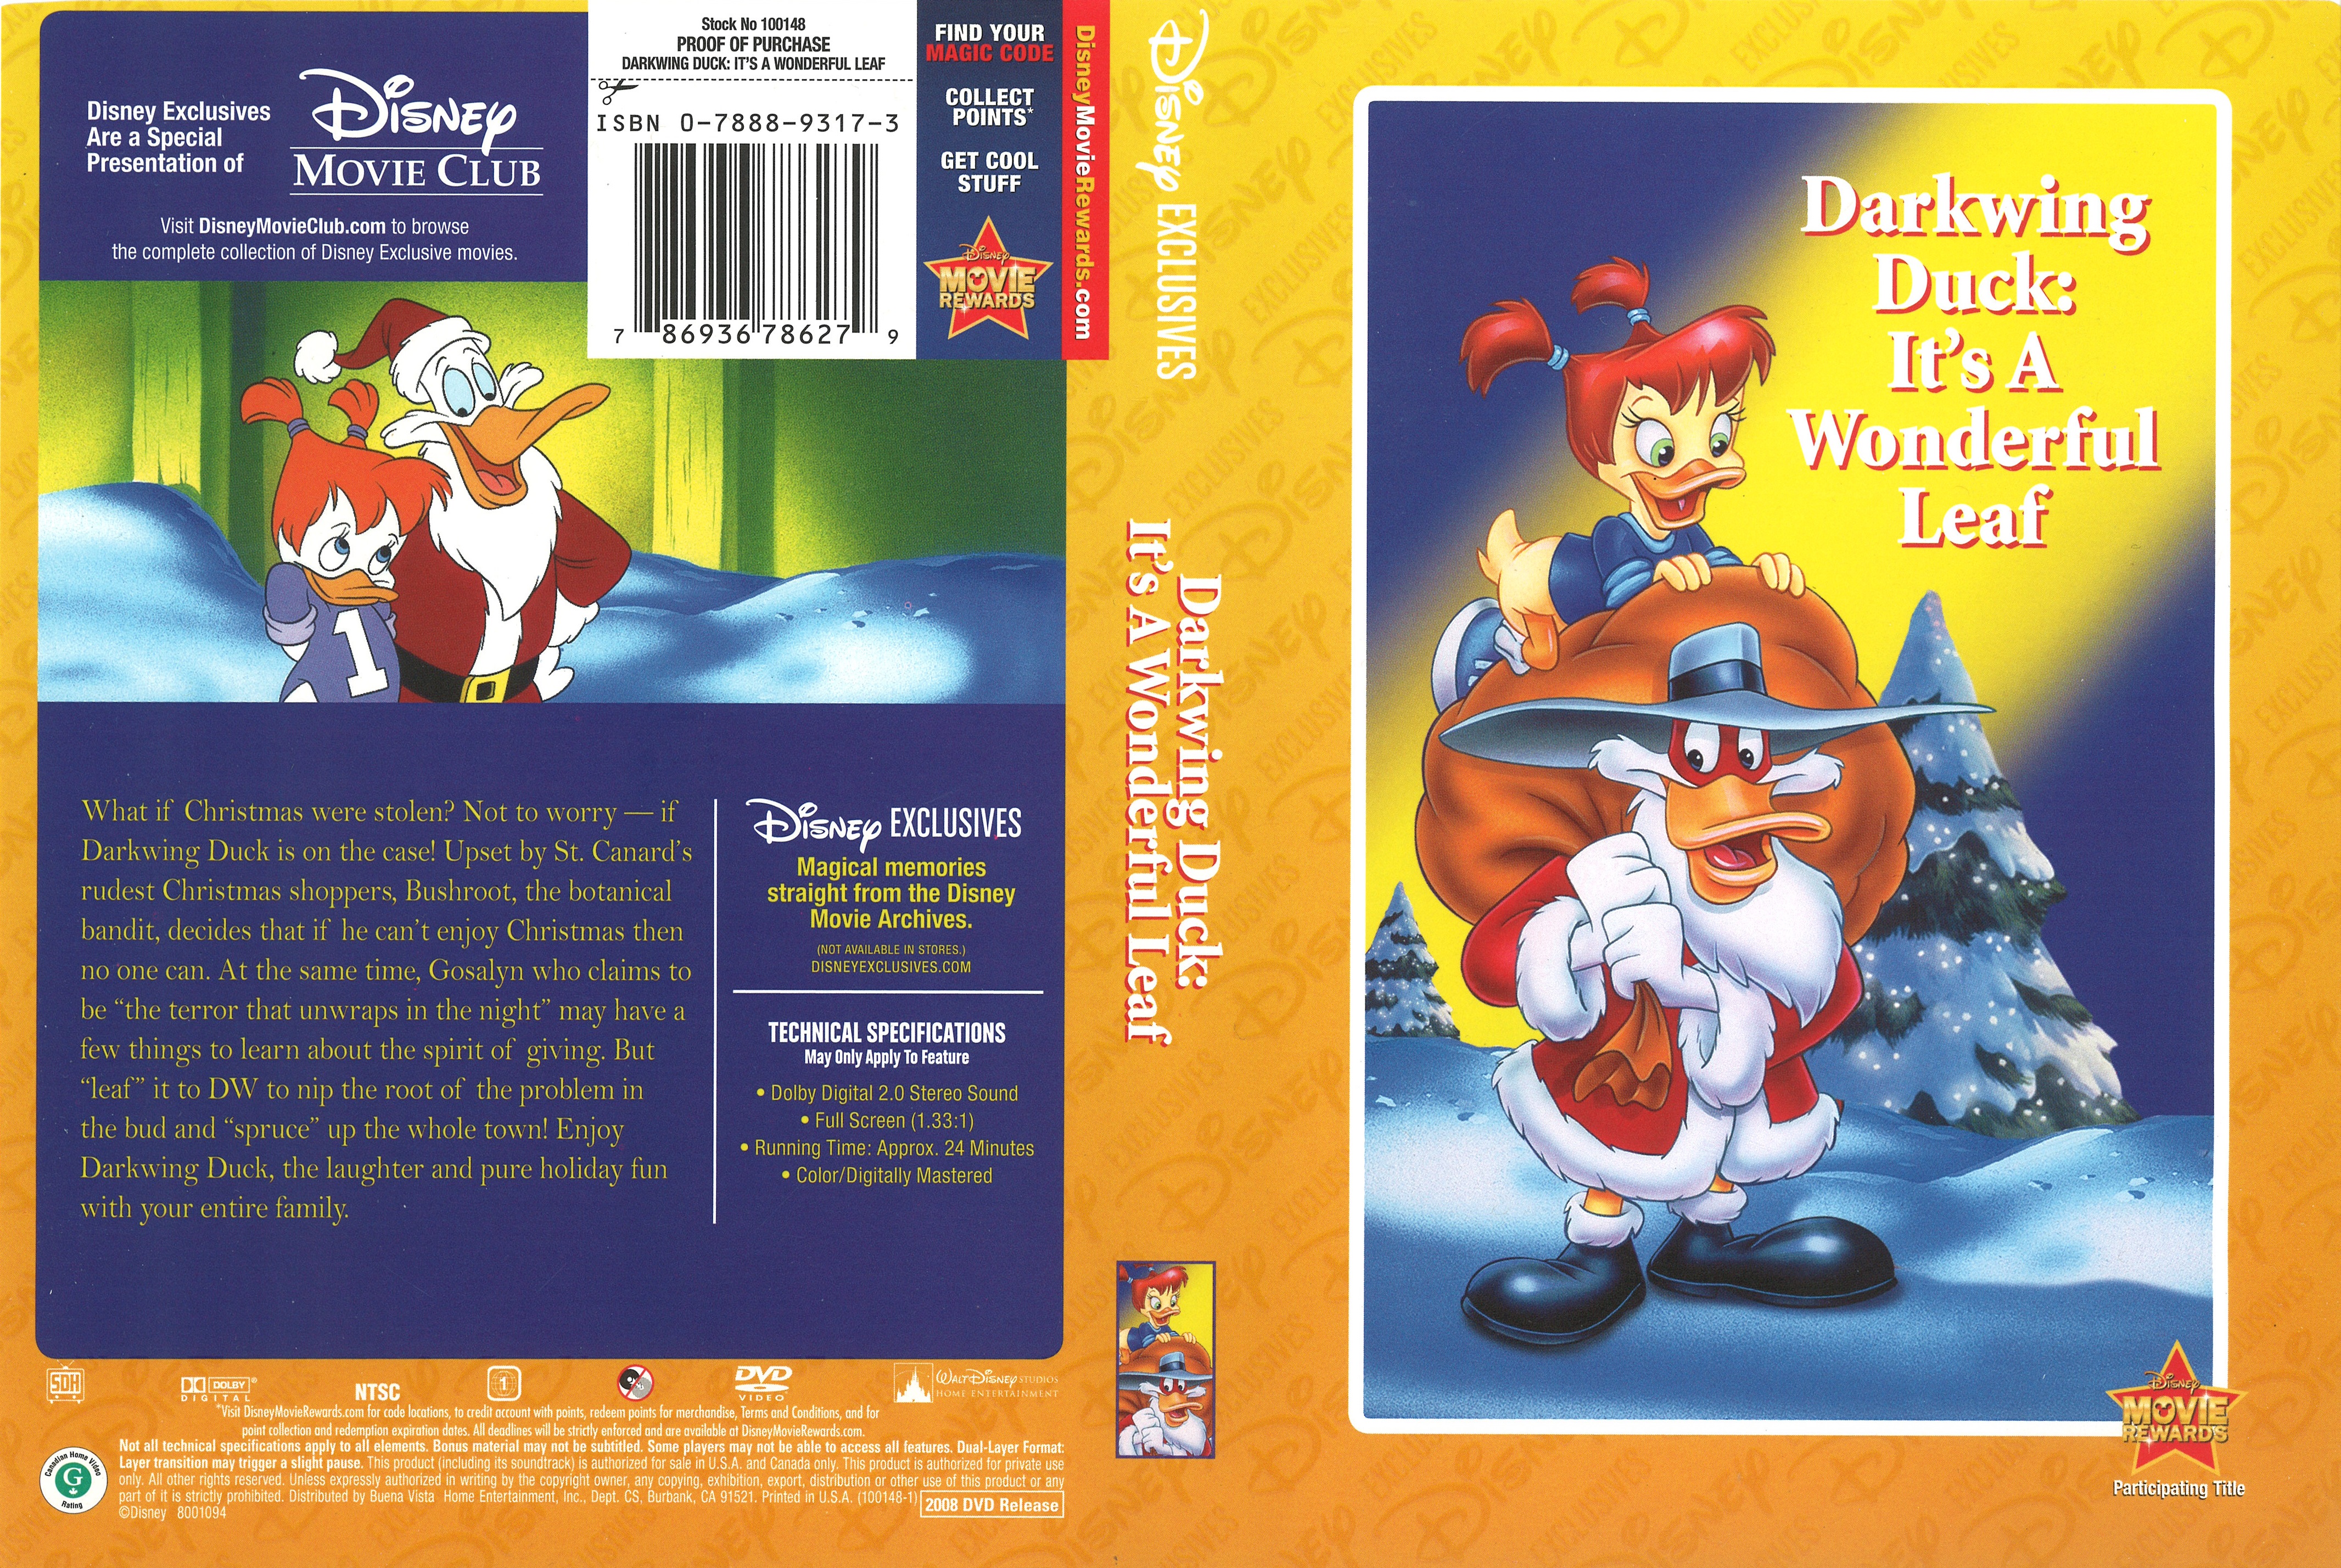 DVD Covers. 